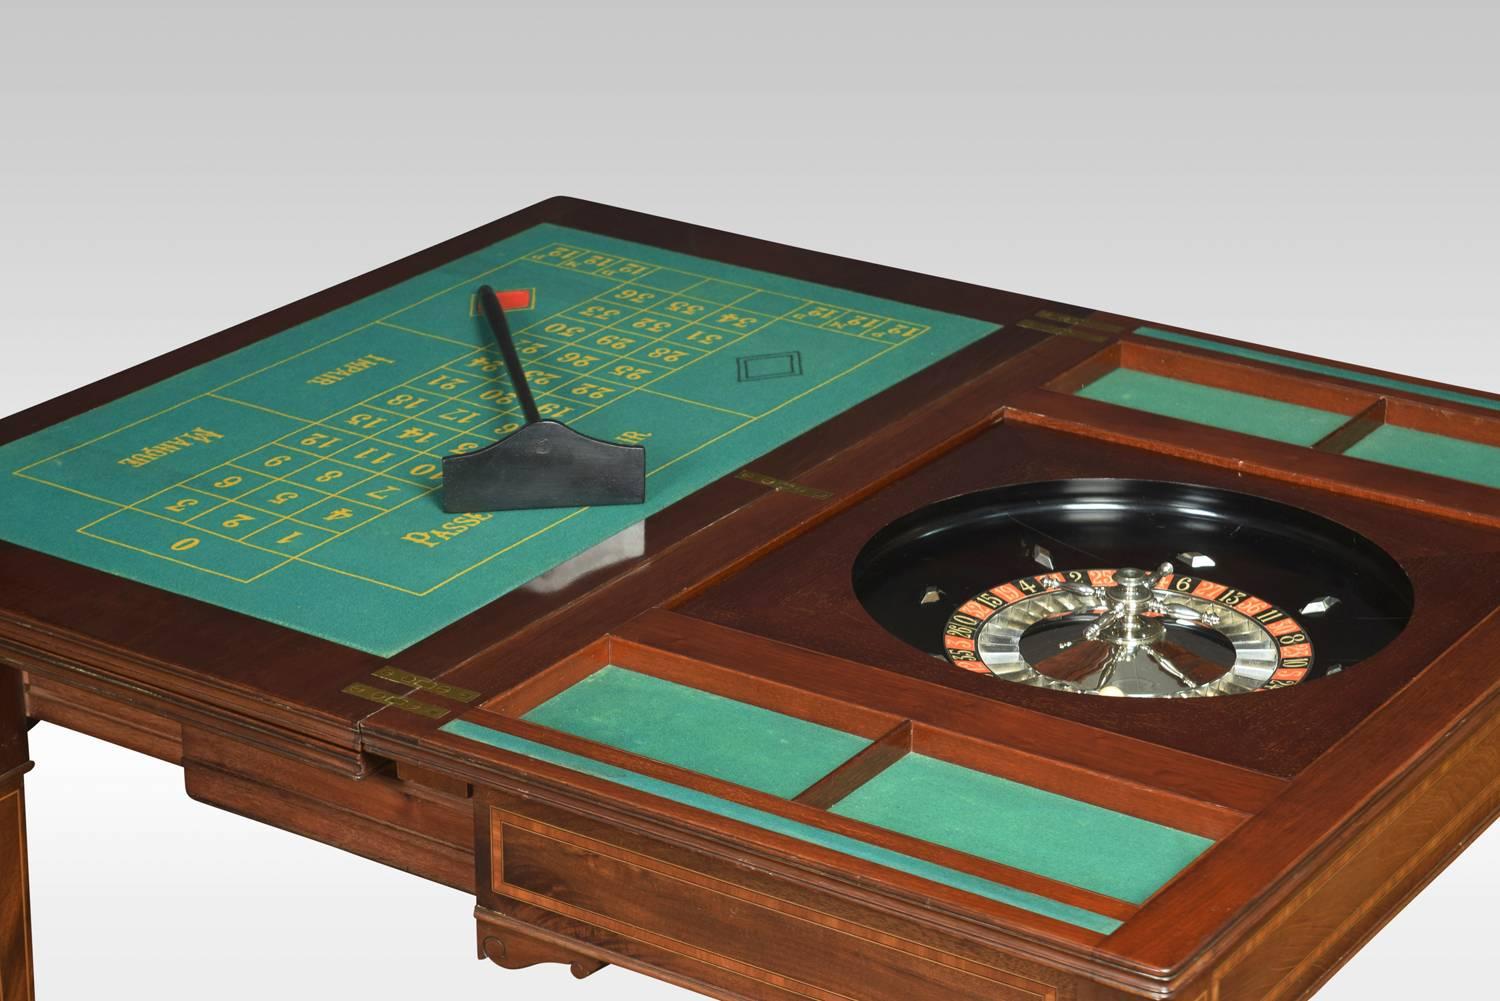 Edwardian mahogany triple top games table for cards and roulette. The large rectangular satinwood inlaid mahogany hinged triple top opens to reveal a gaming interior for playing cards and then opens again to reveal a roulette table. The table raised